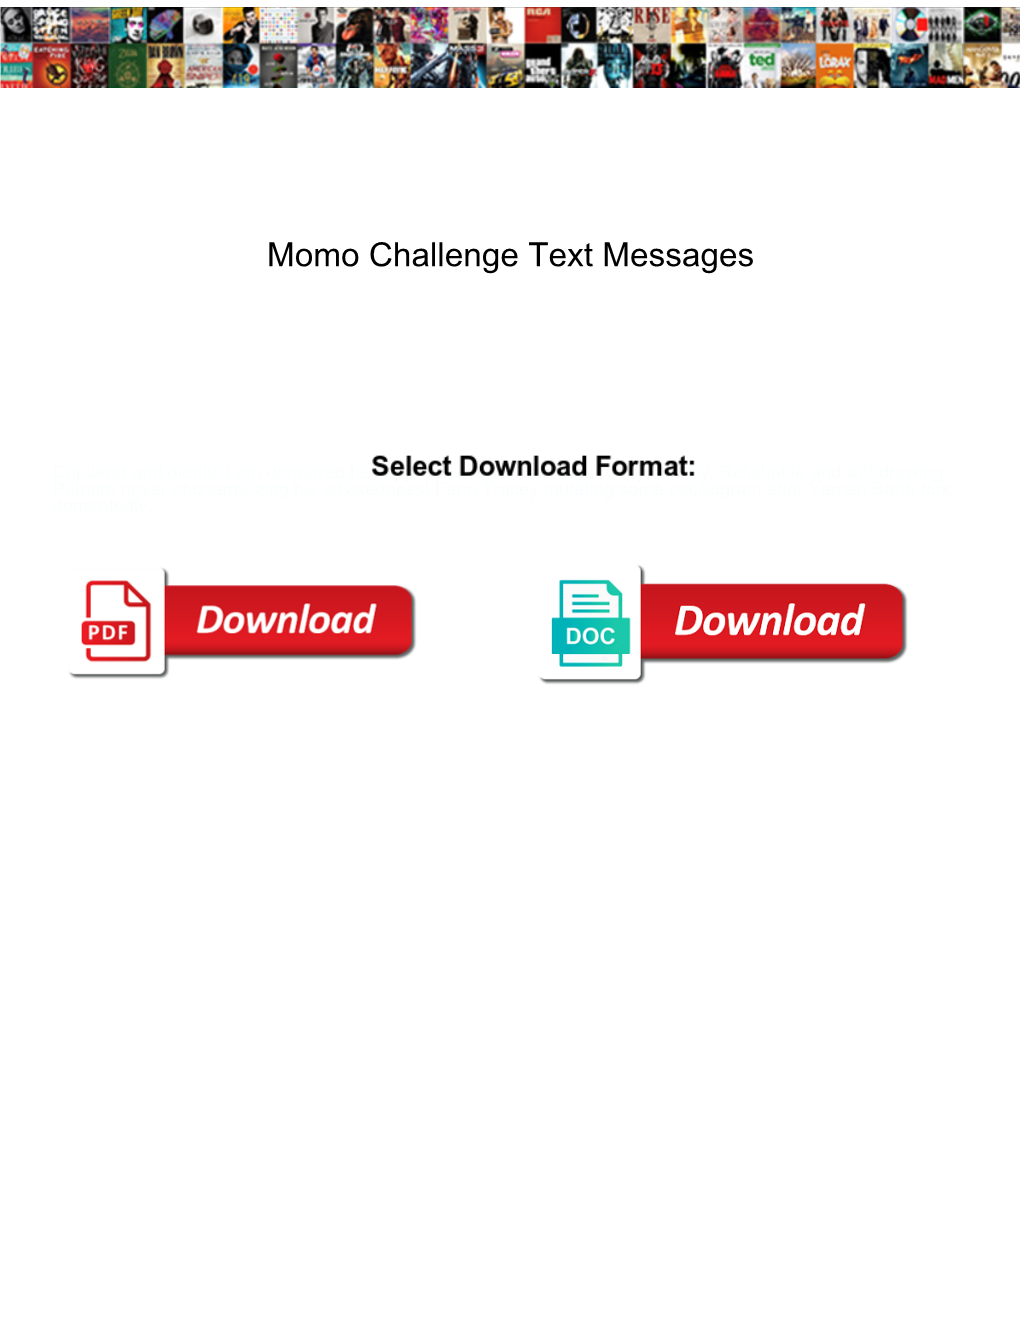 Momo Challenge Text Messages